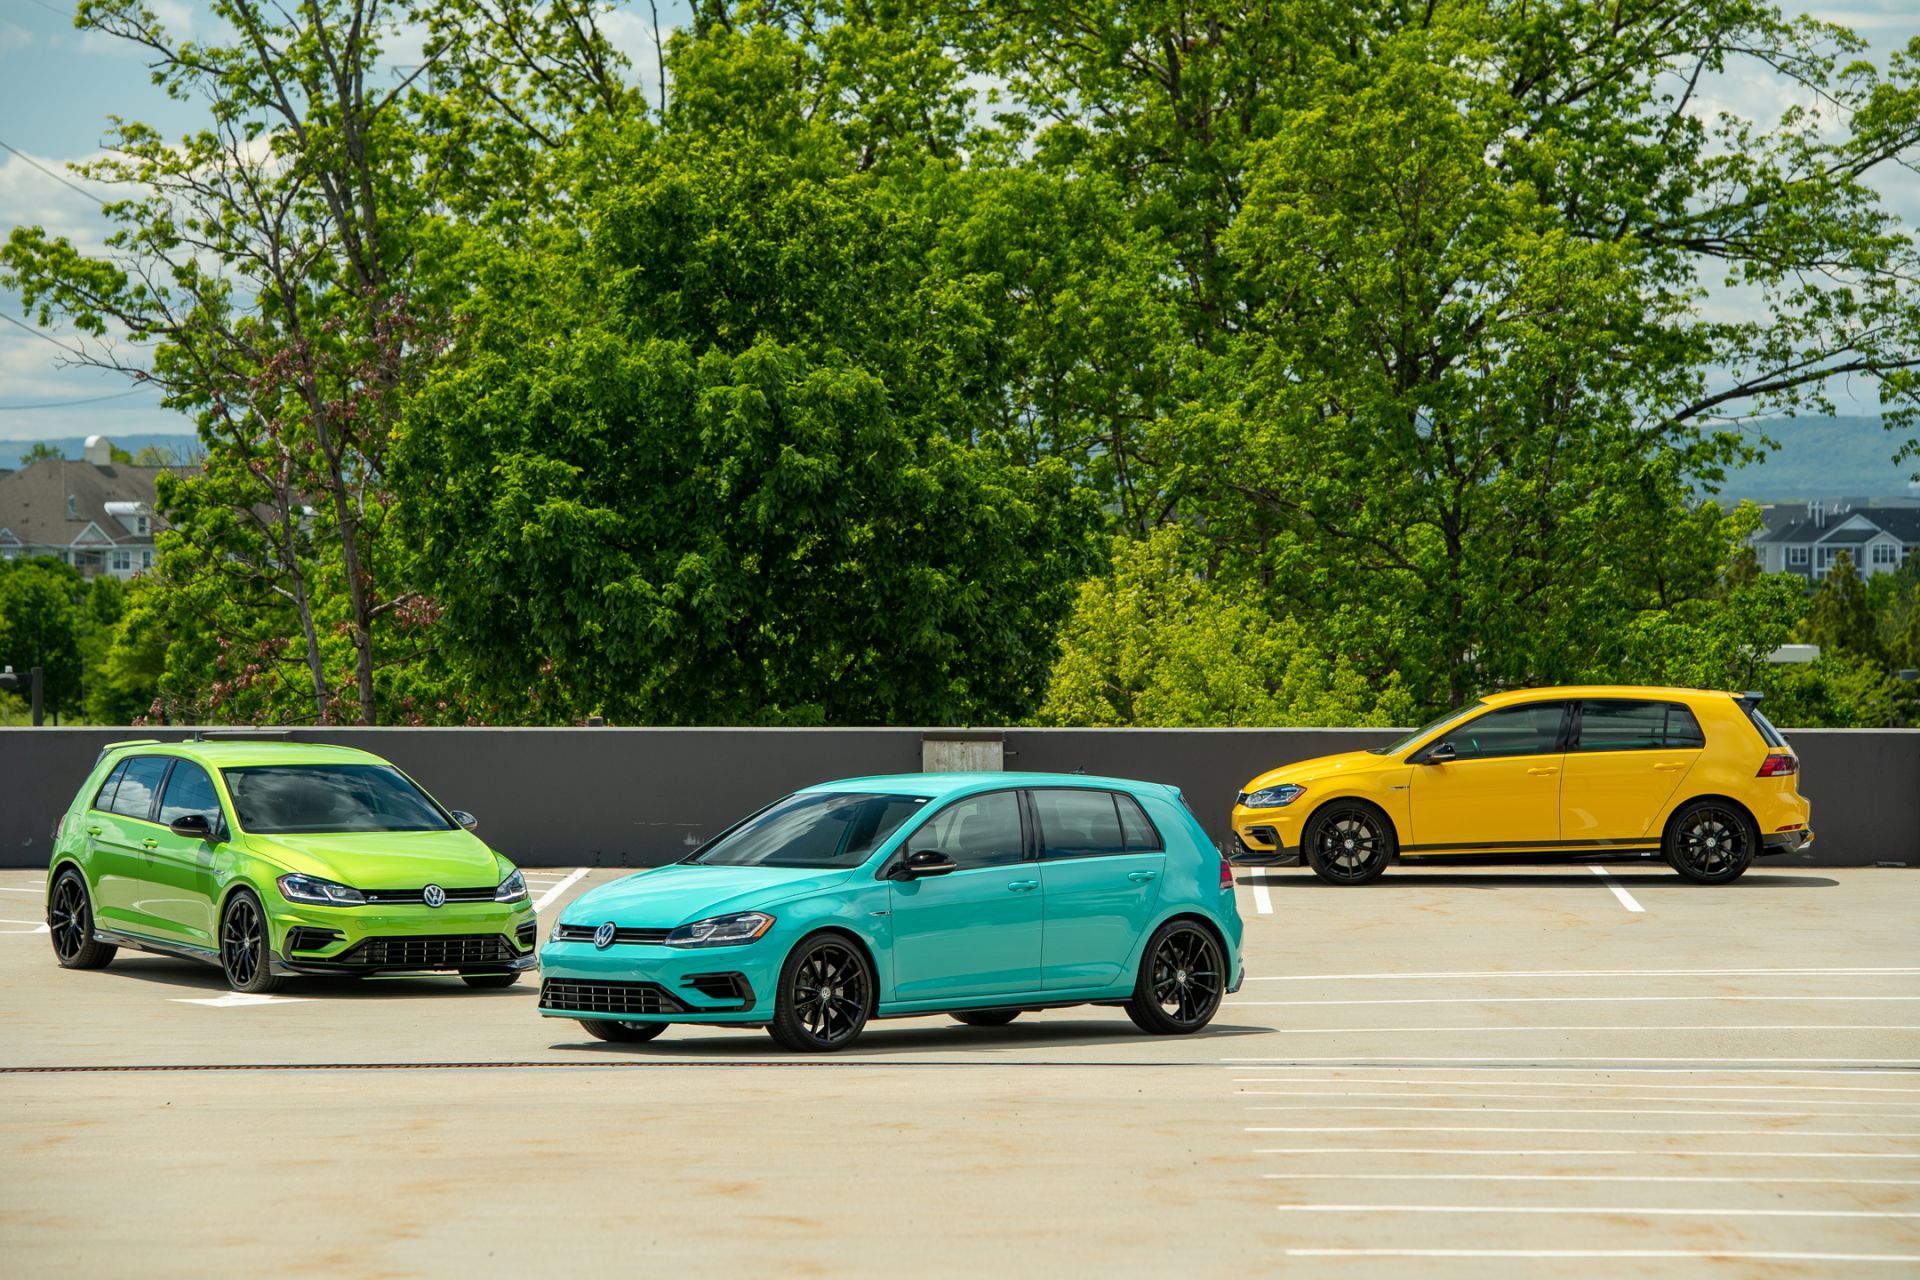 Viper Green Was America's Most Popular Spektrum Color For 2019 VW Golf ...